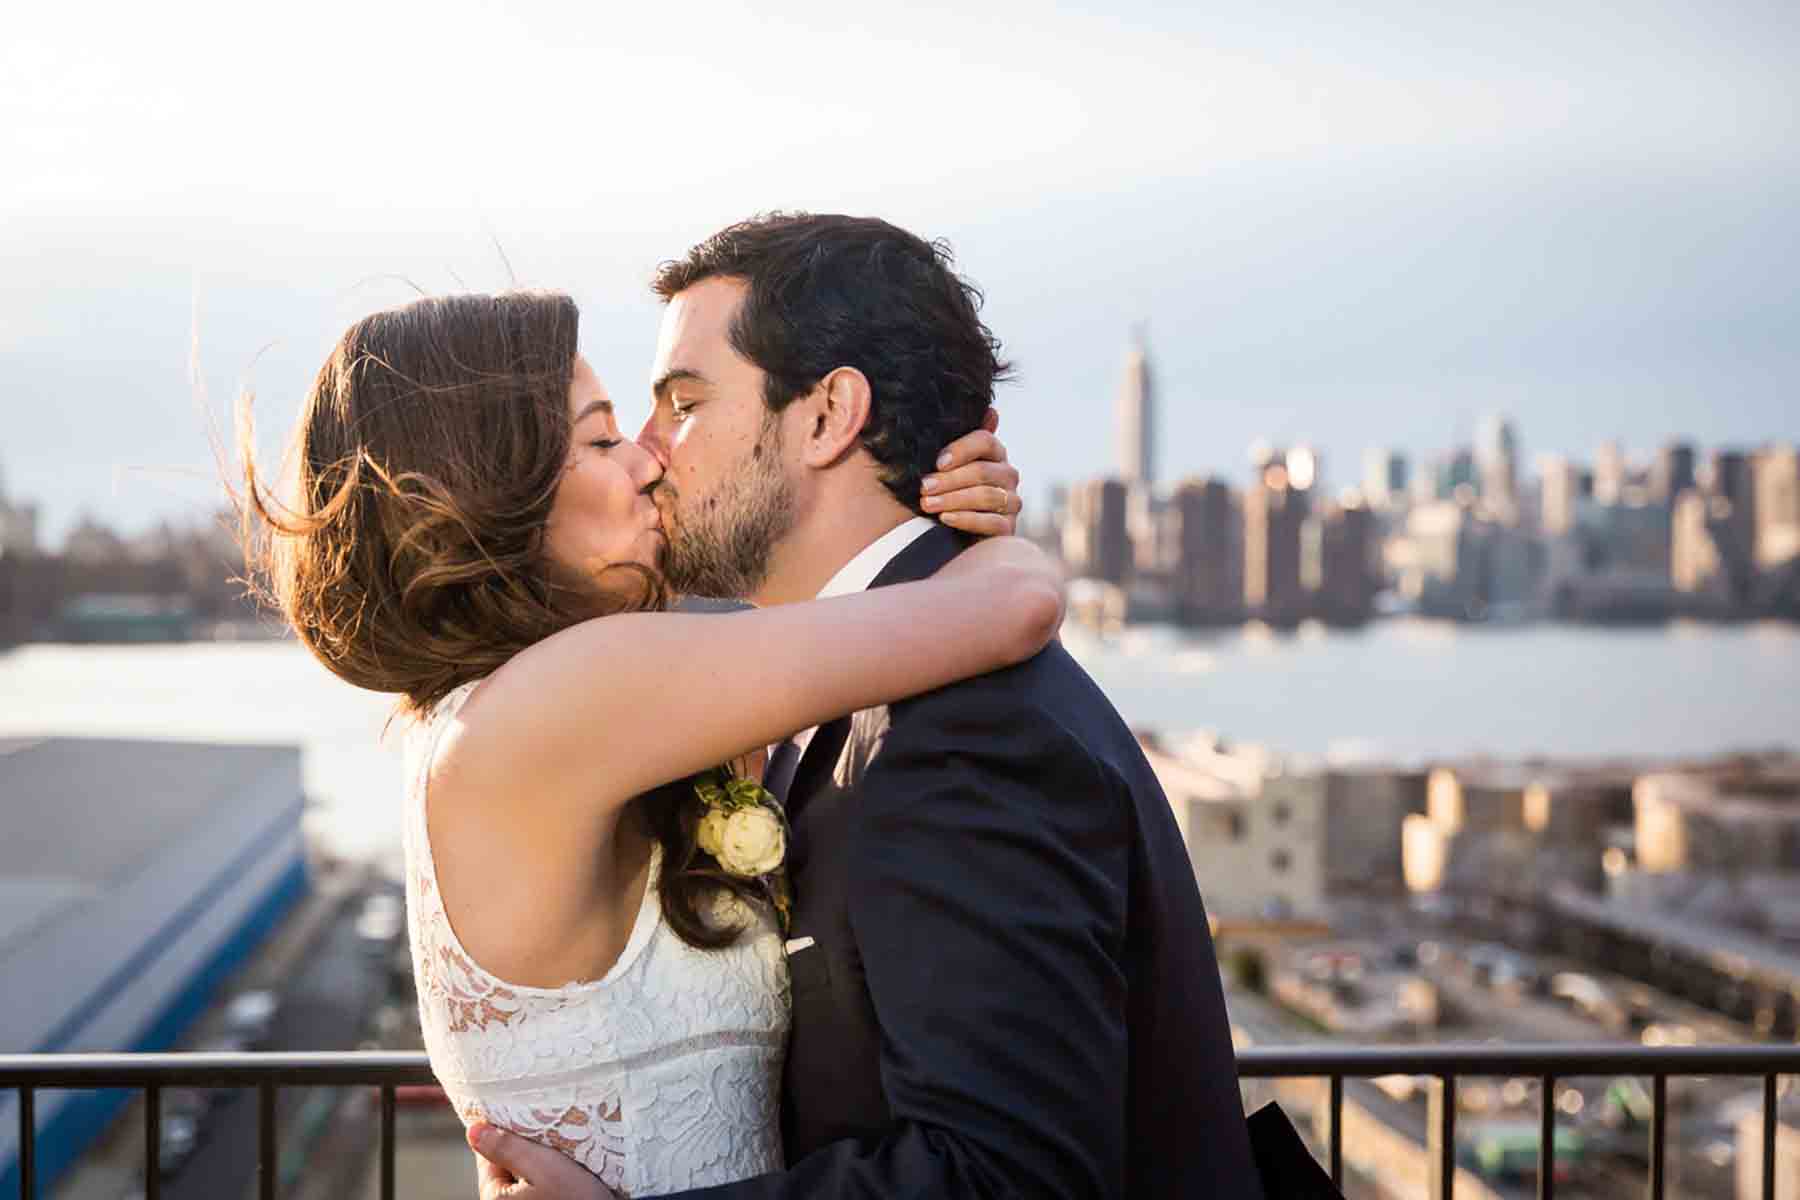 Bride and groom kissing with NYC skyline in background for an article on how to save money on wedding photography